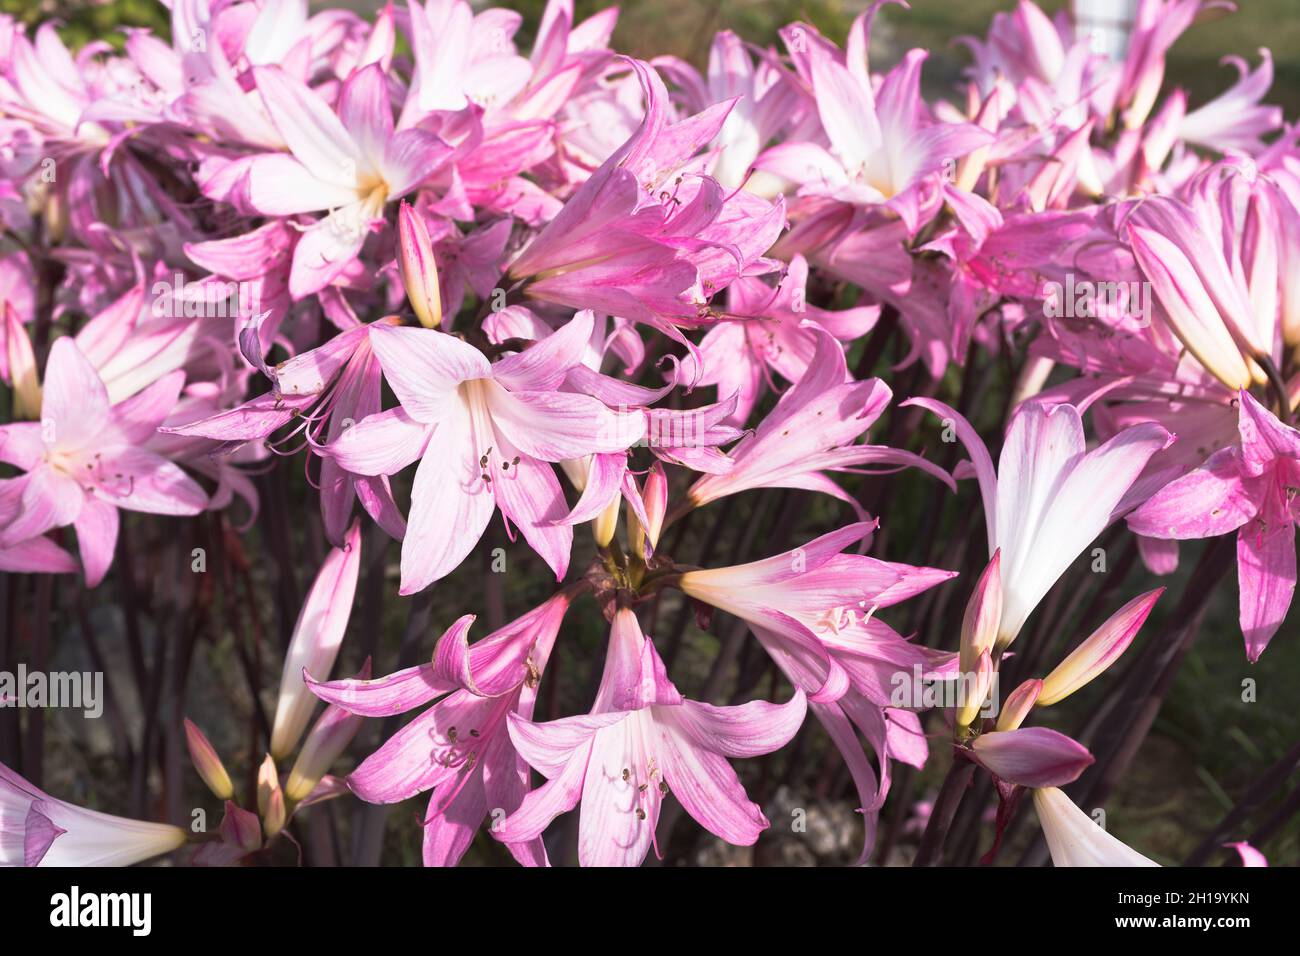 dh Lily FLORA GUERNSEY Pink Nerine bowdenii lilys close up Stock Photo